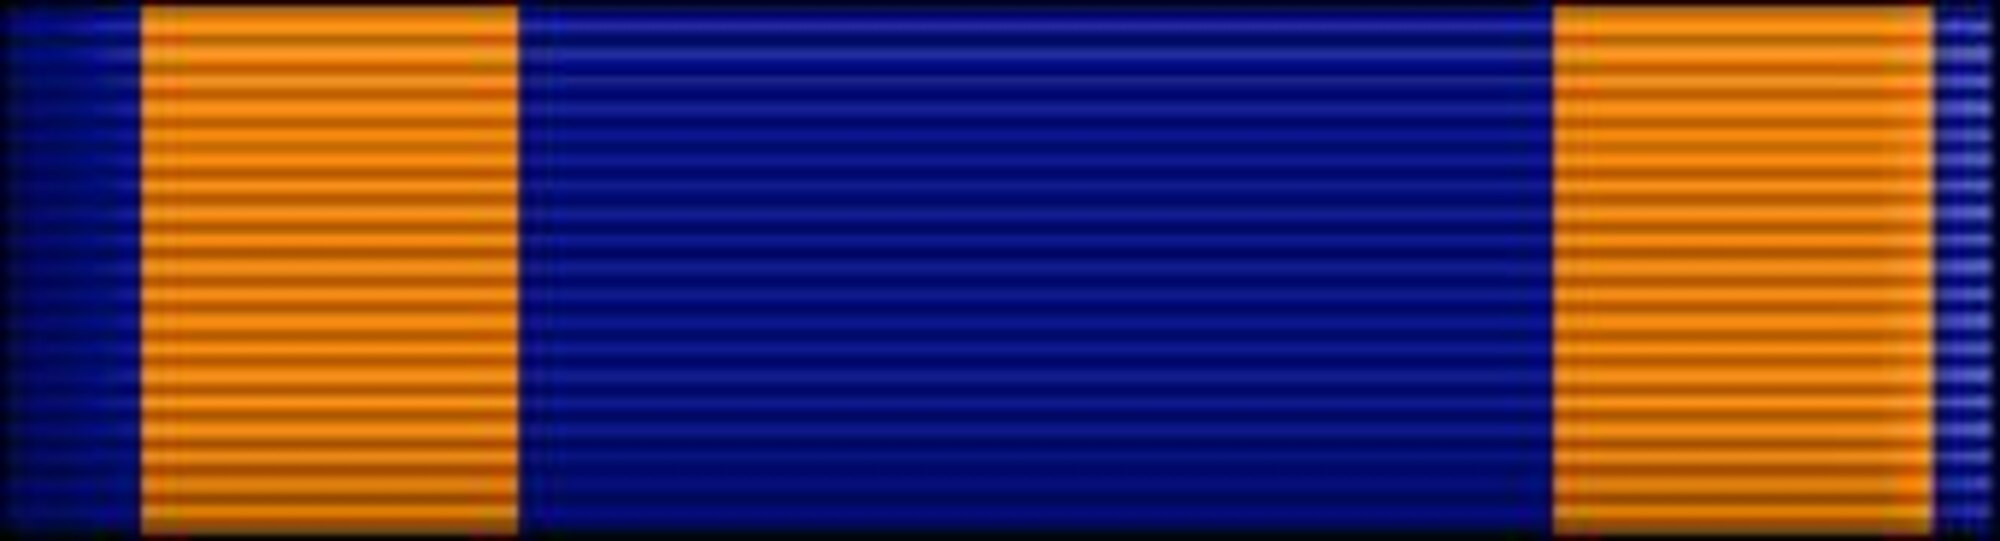 Air Medal, awarded to any person who, while serving in any capacity in or with the Armed Forces of the United States, shall have distinguished himself/herself by meritorious achievement while participating in aerial flight. Awards may be made to recognize single acts of merit or heroism, or for meritorious service. Air Force Awards and Decorations (enhance color), U.S. Air Force graphic, AFNEWS/PAND.  The JPG image is a stylized version whereas the EPS version is a two-dimensional line art illustration.